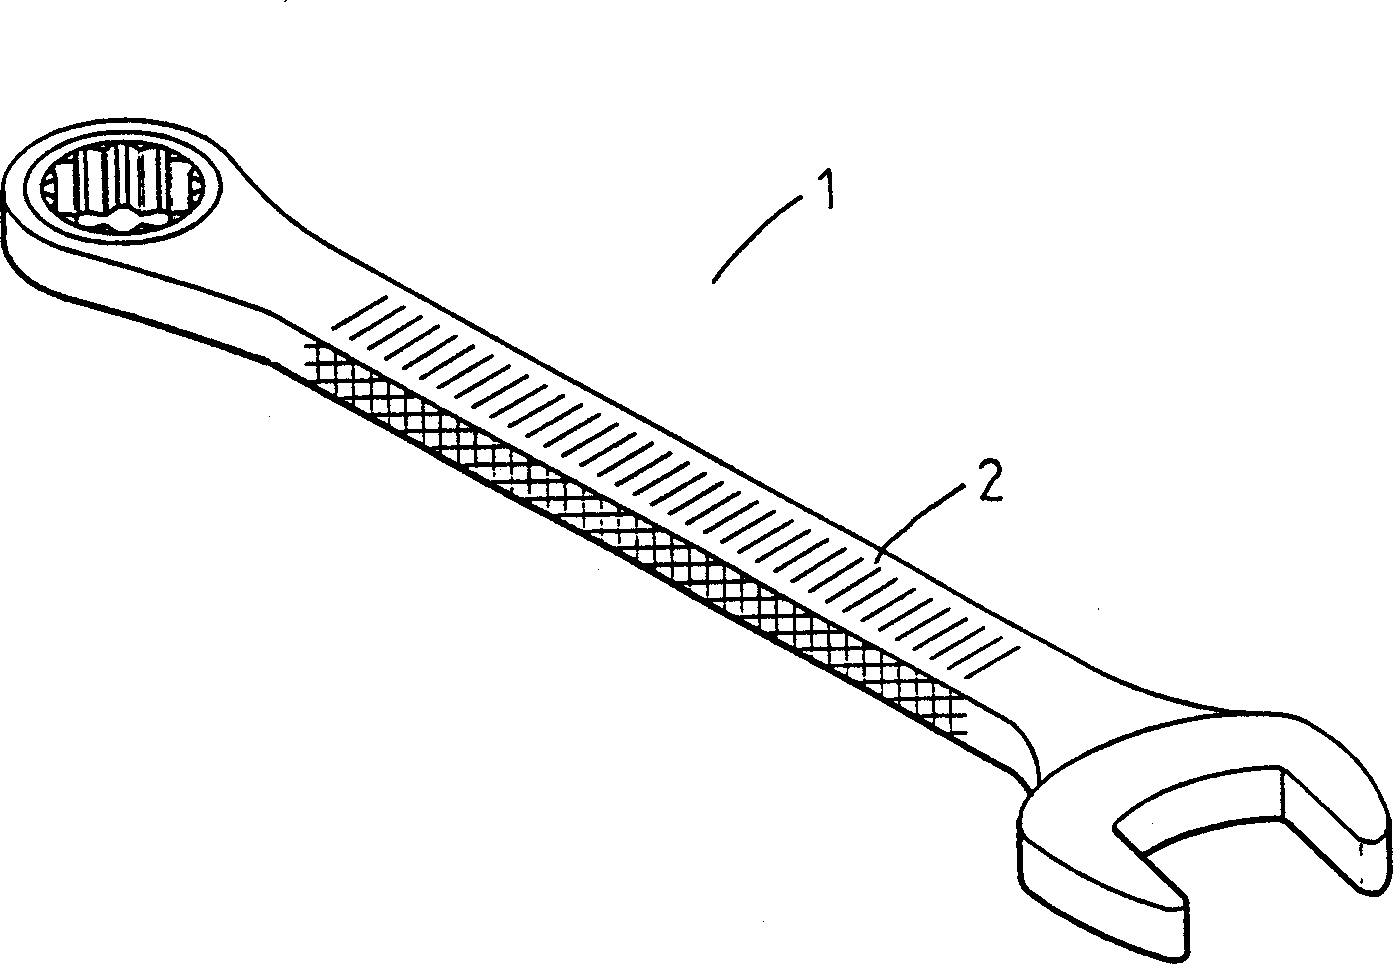 Gripping implement with improved arrangement